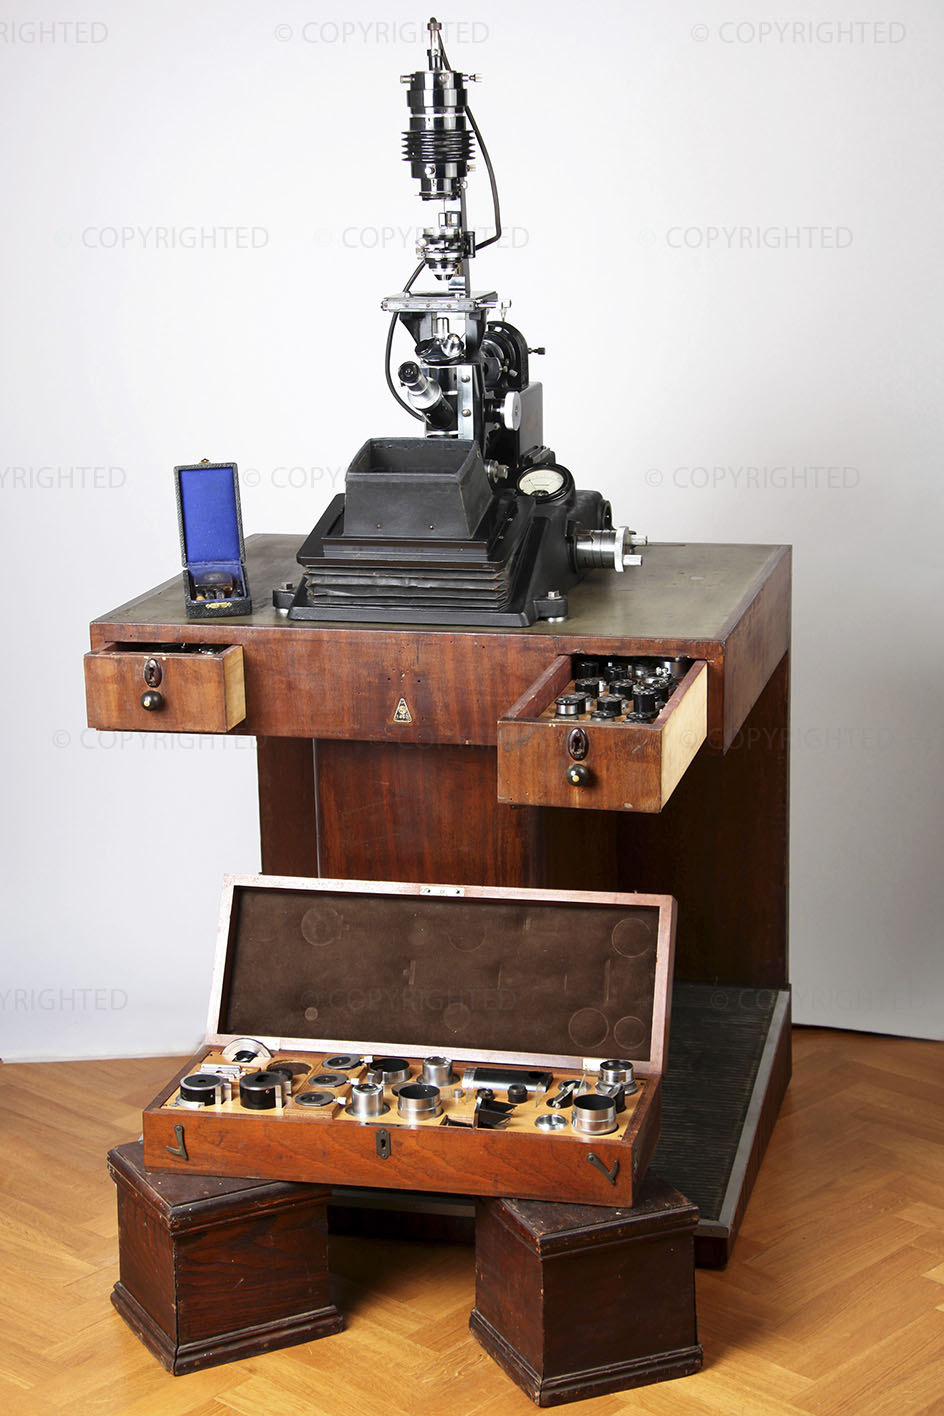 Optical and photographic microscope, model ZC